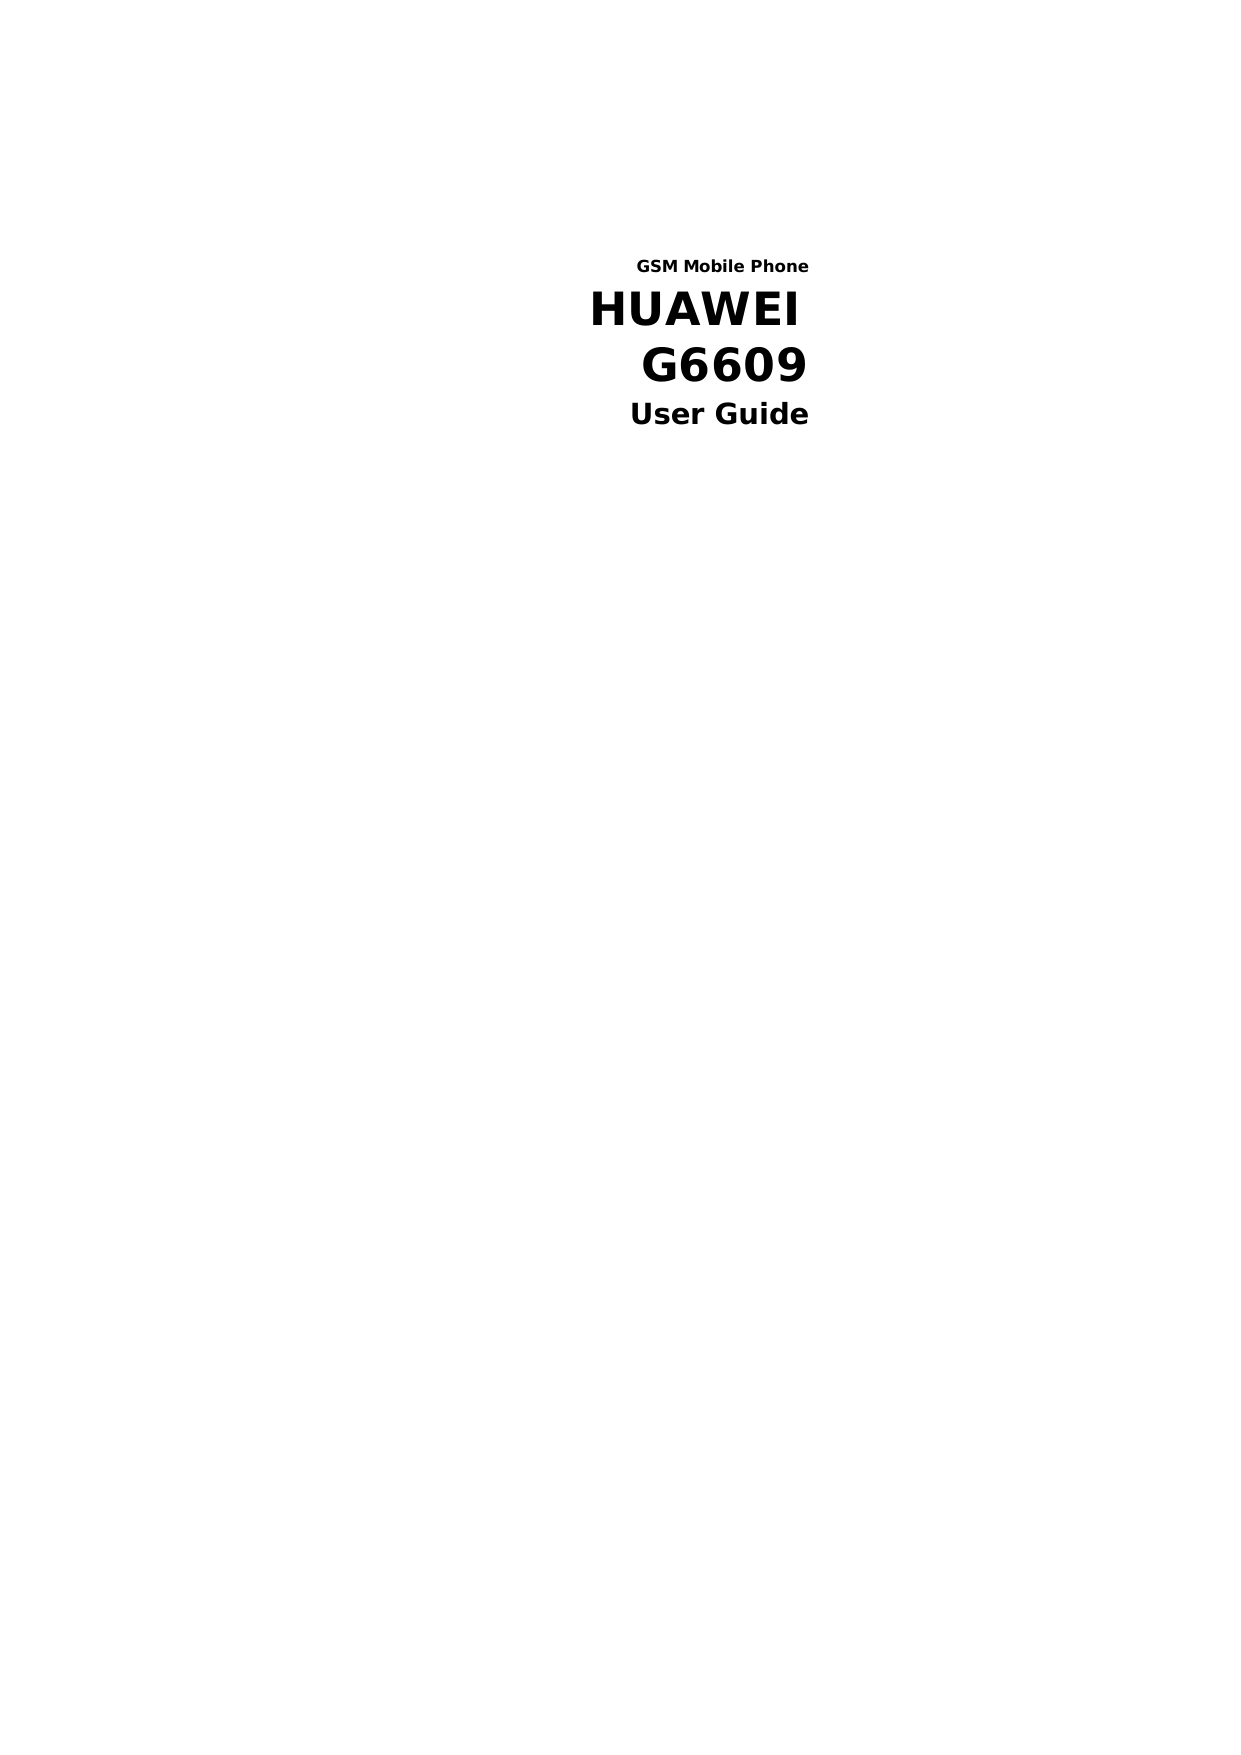            GSM Mobile Phone HUAWEI G6609 User Guide 